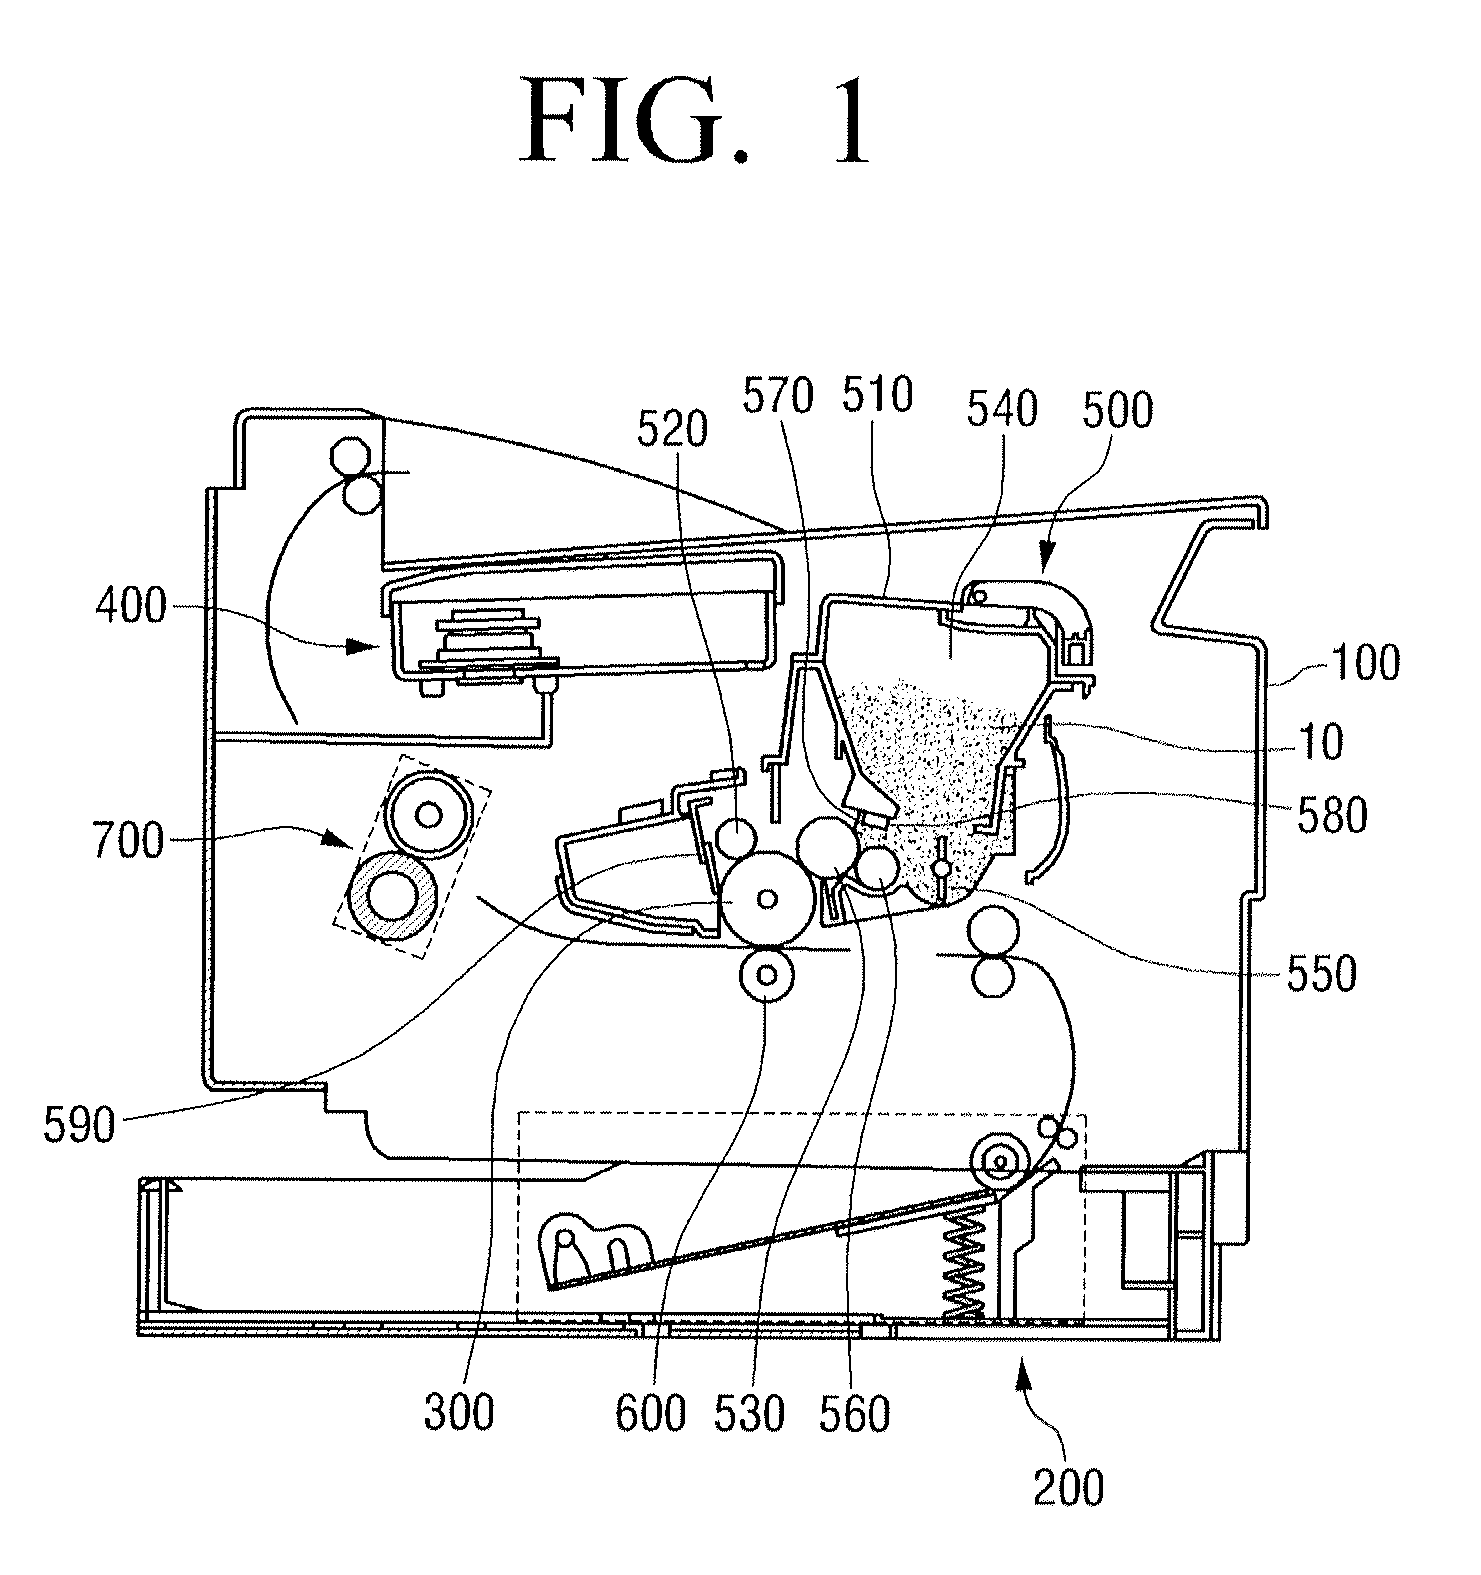 Developing roller for electrophotographic image forming apparatus, and manufacturing method of the same